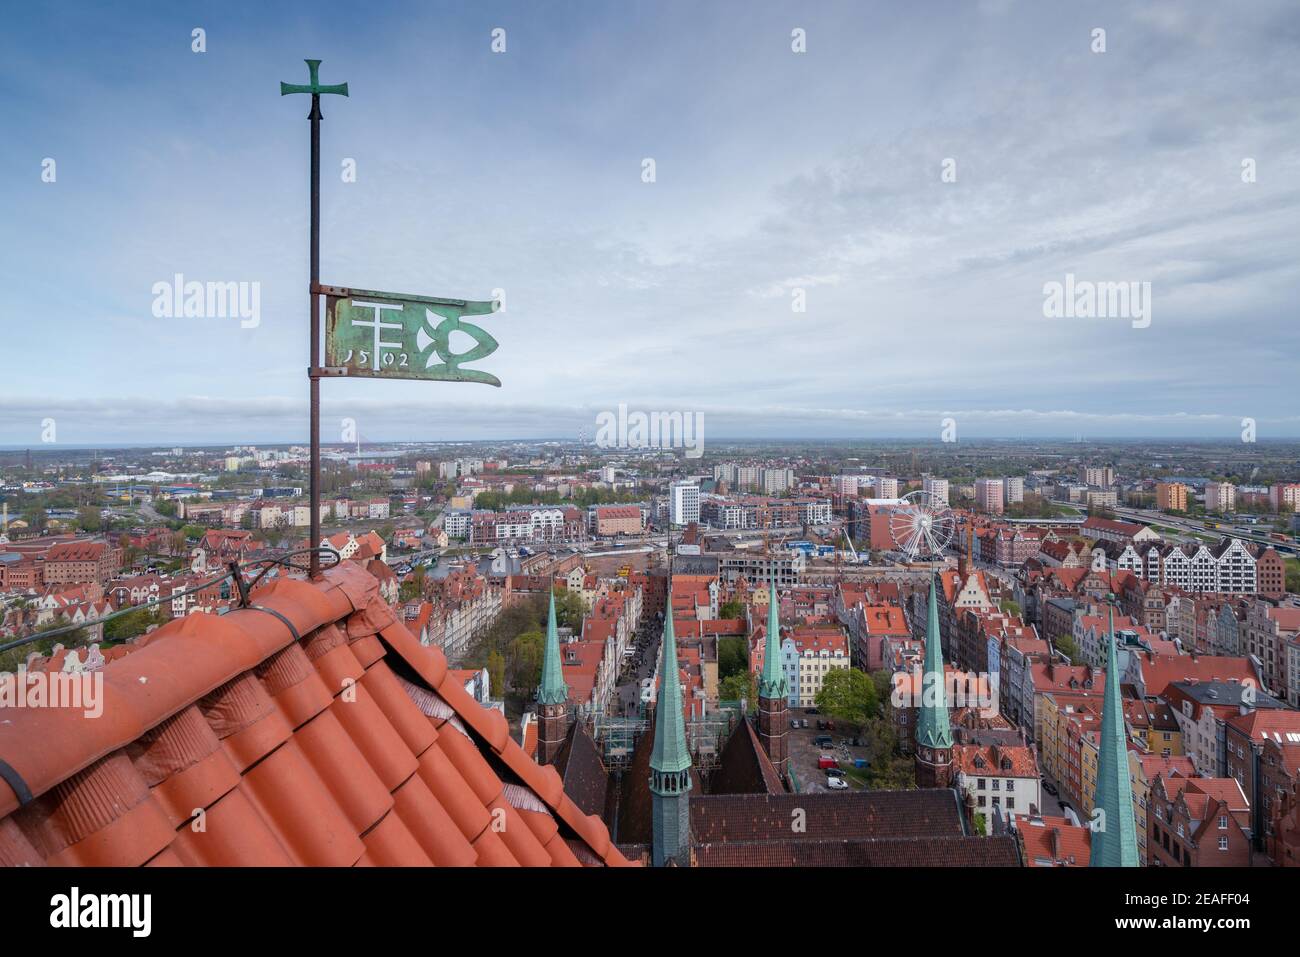 Cityscape viewed from the top of a cathedral tower with red roof and green metal banner in the foreground. Spring in the city of Gdansk, Poland. Stock Photo